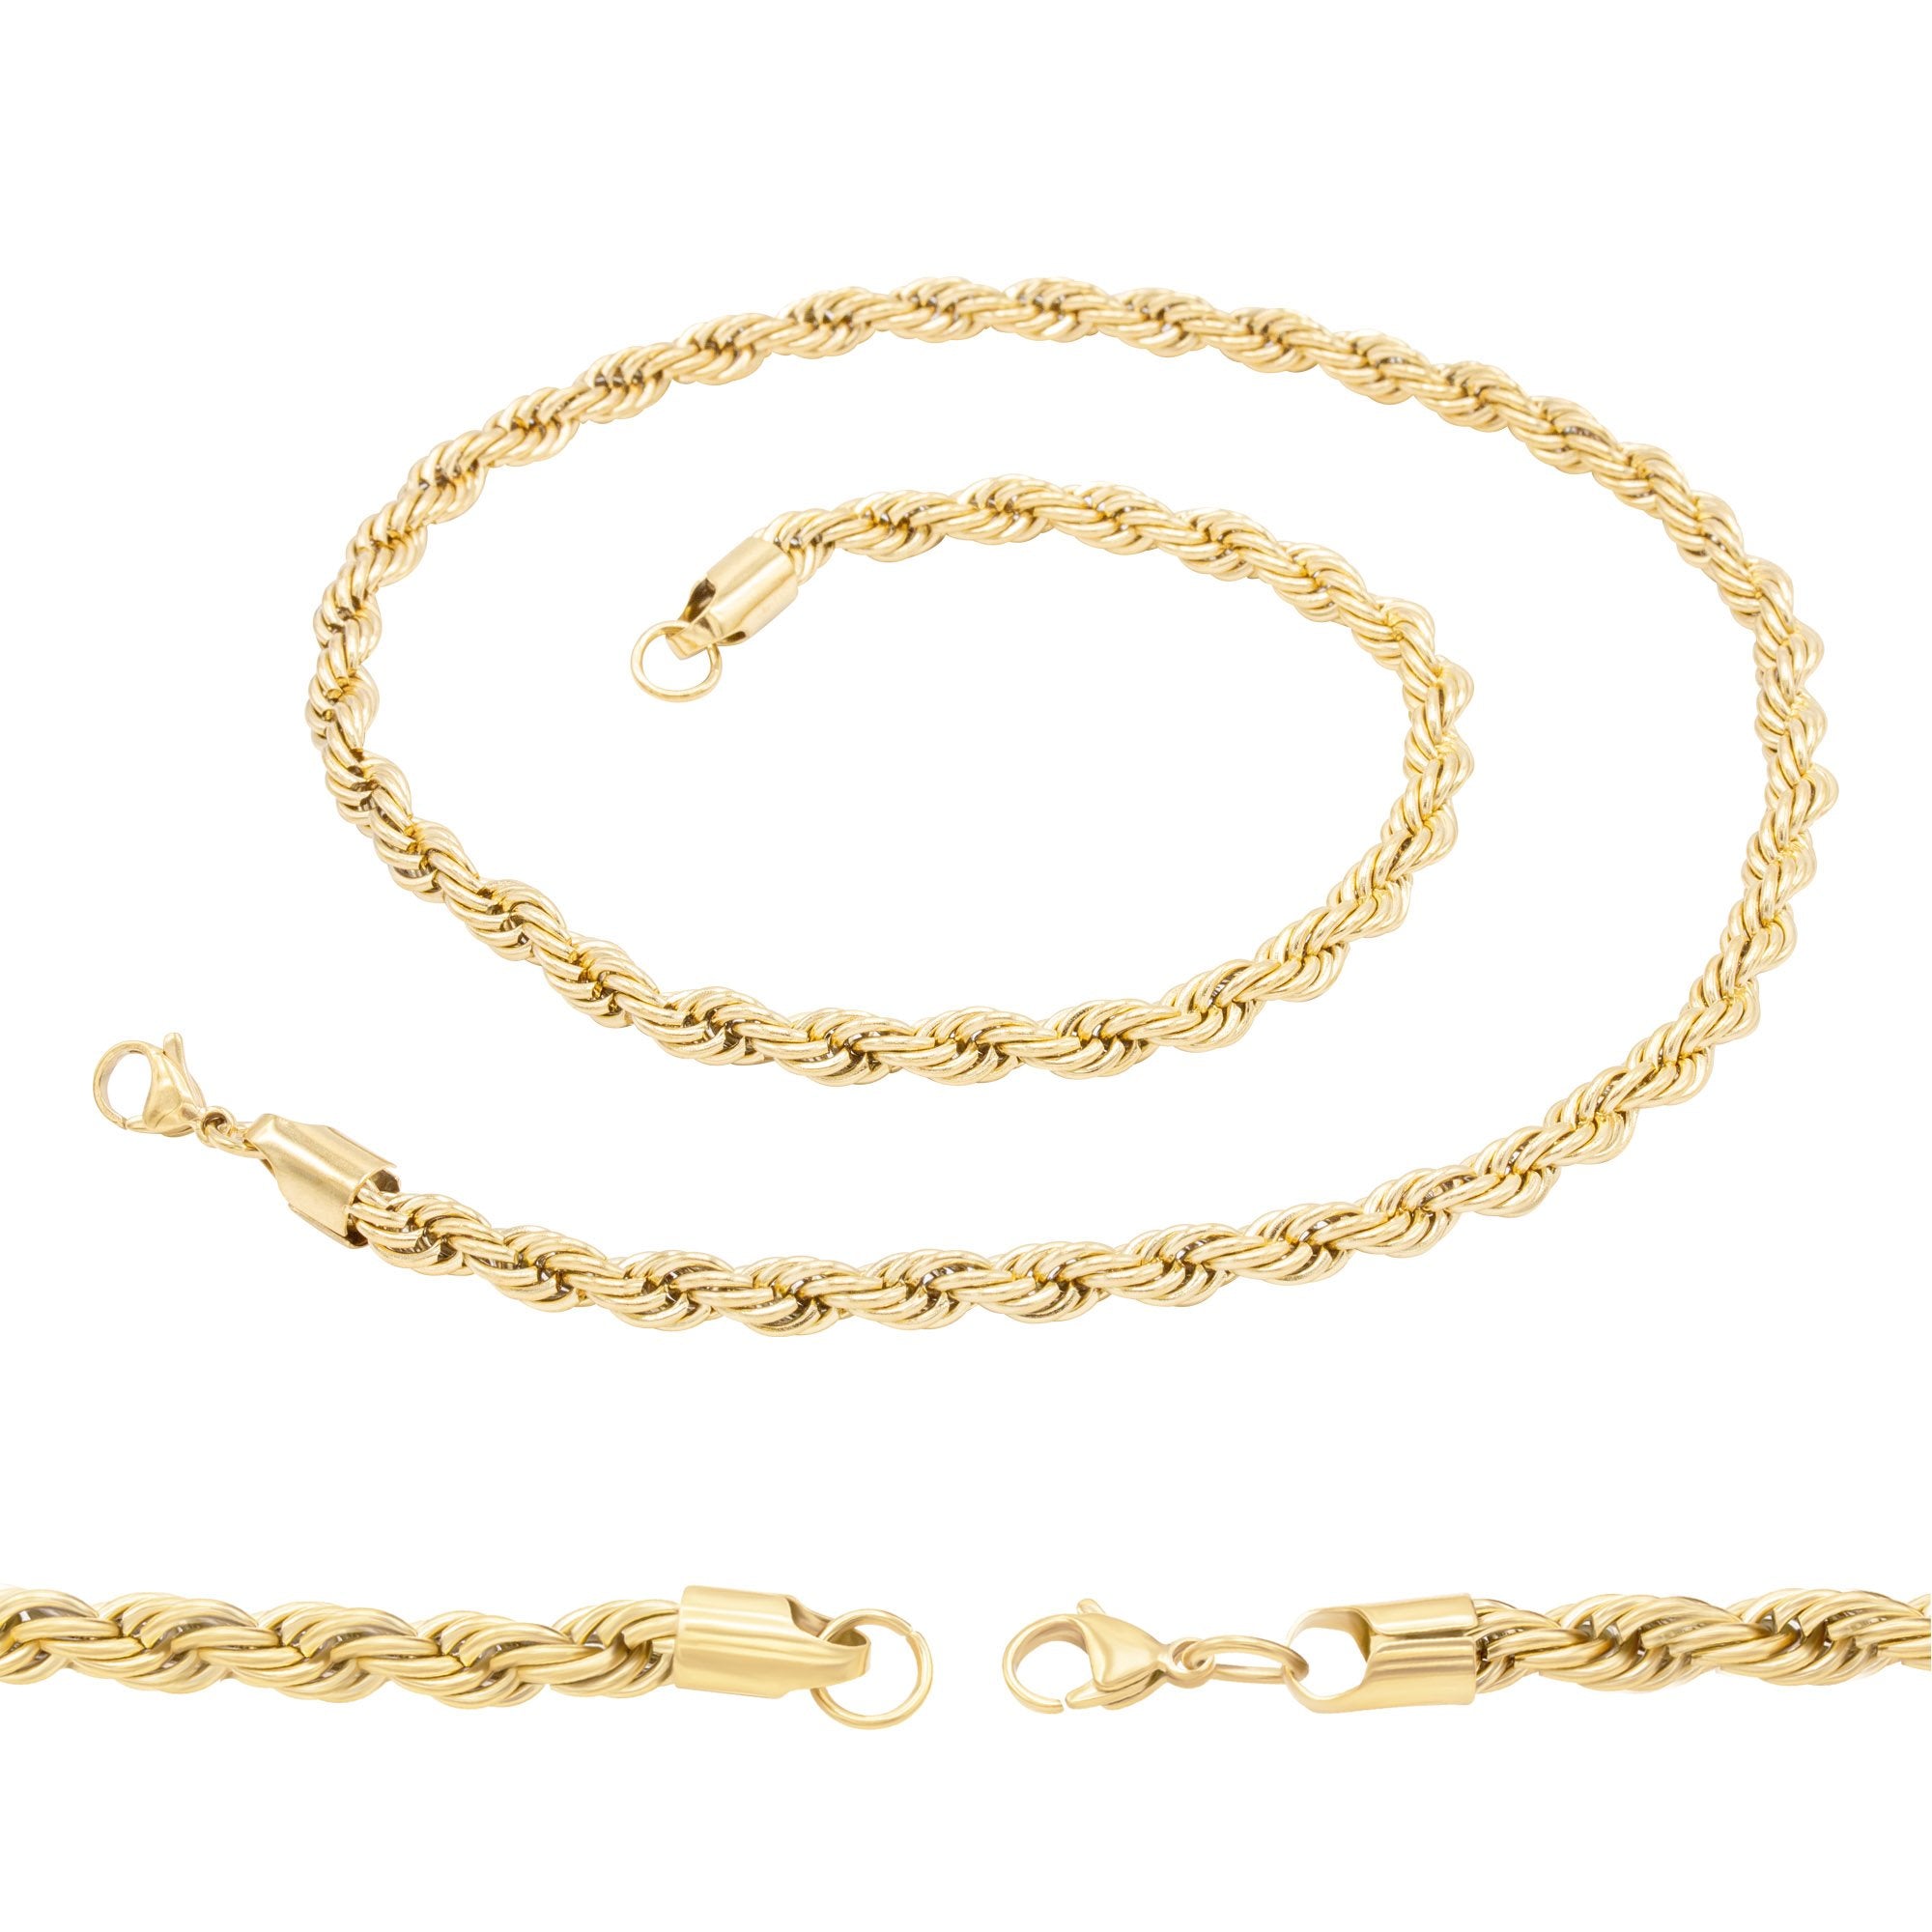 Buy HolyFast Twist Chain Necklace - Stainless Steel Rope Jewelry for Men &  Women at Amazon.in